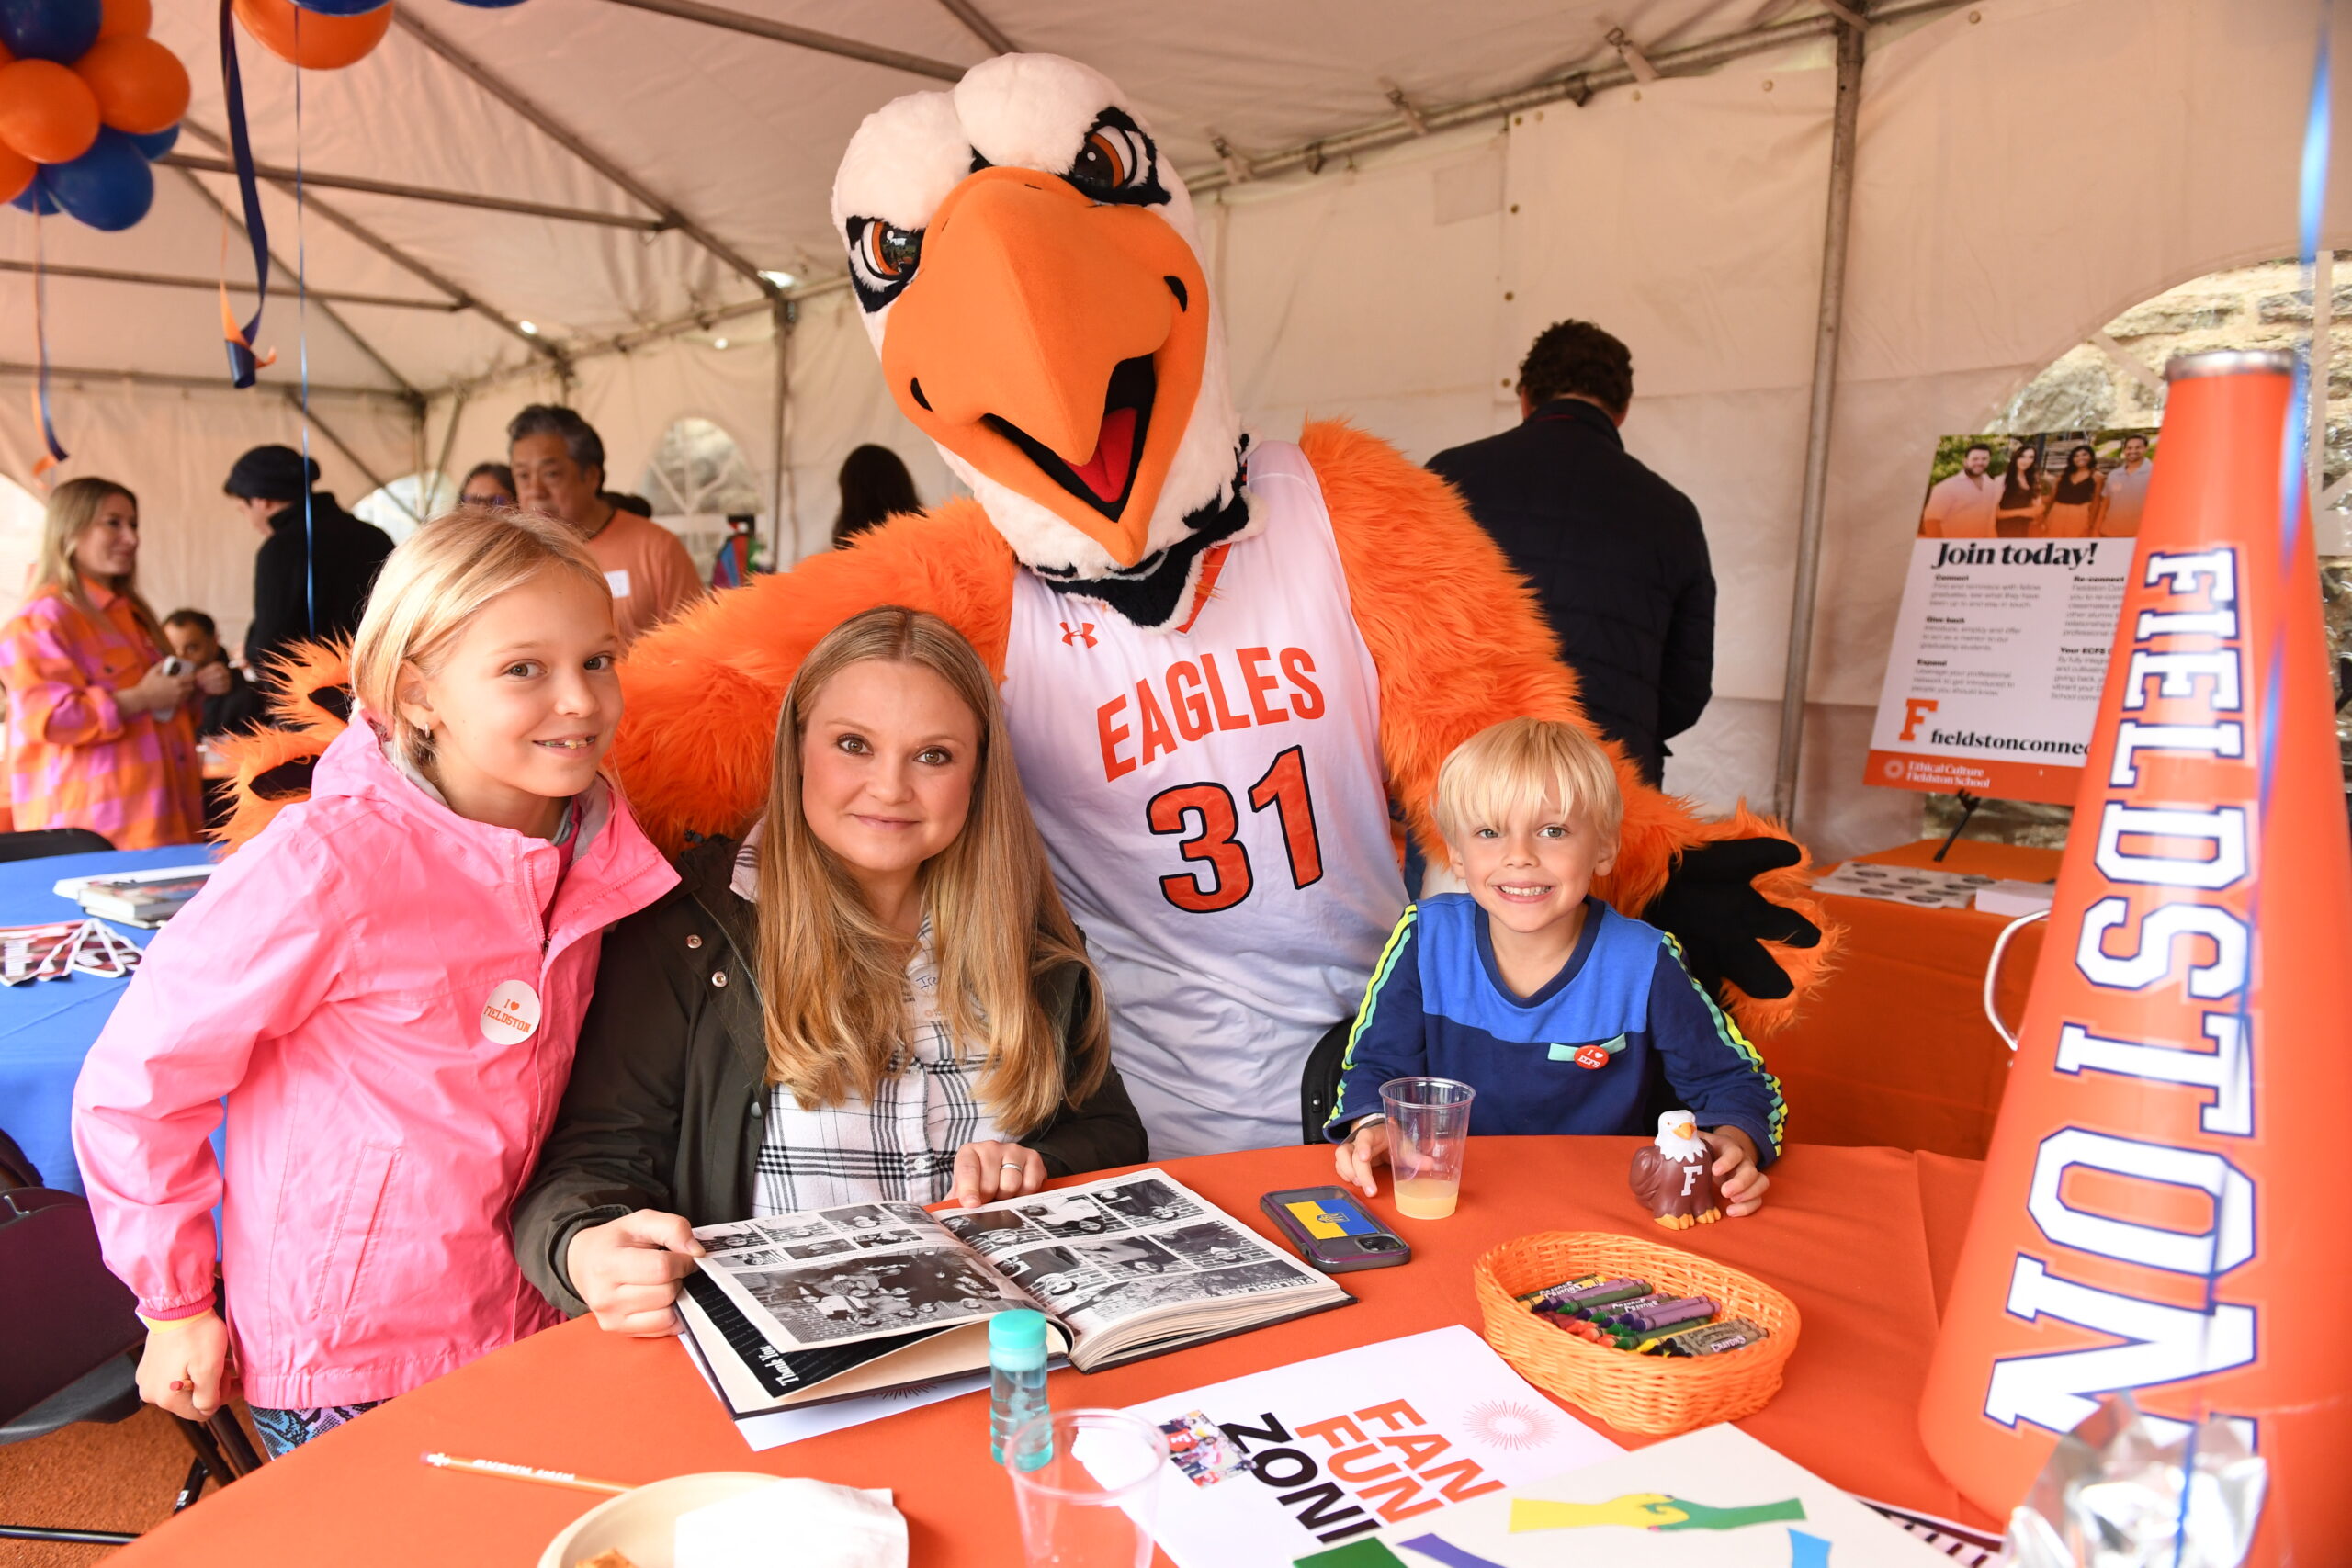 The Eagle poses in the alumni tent with one alumni and two students